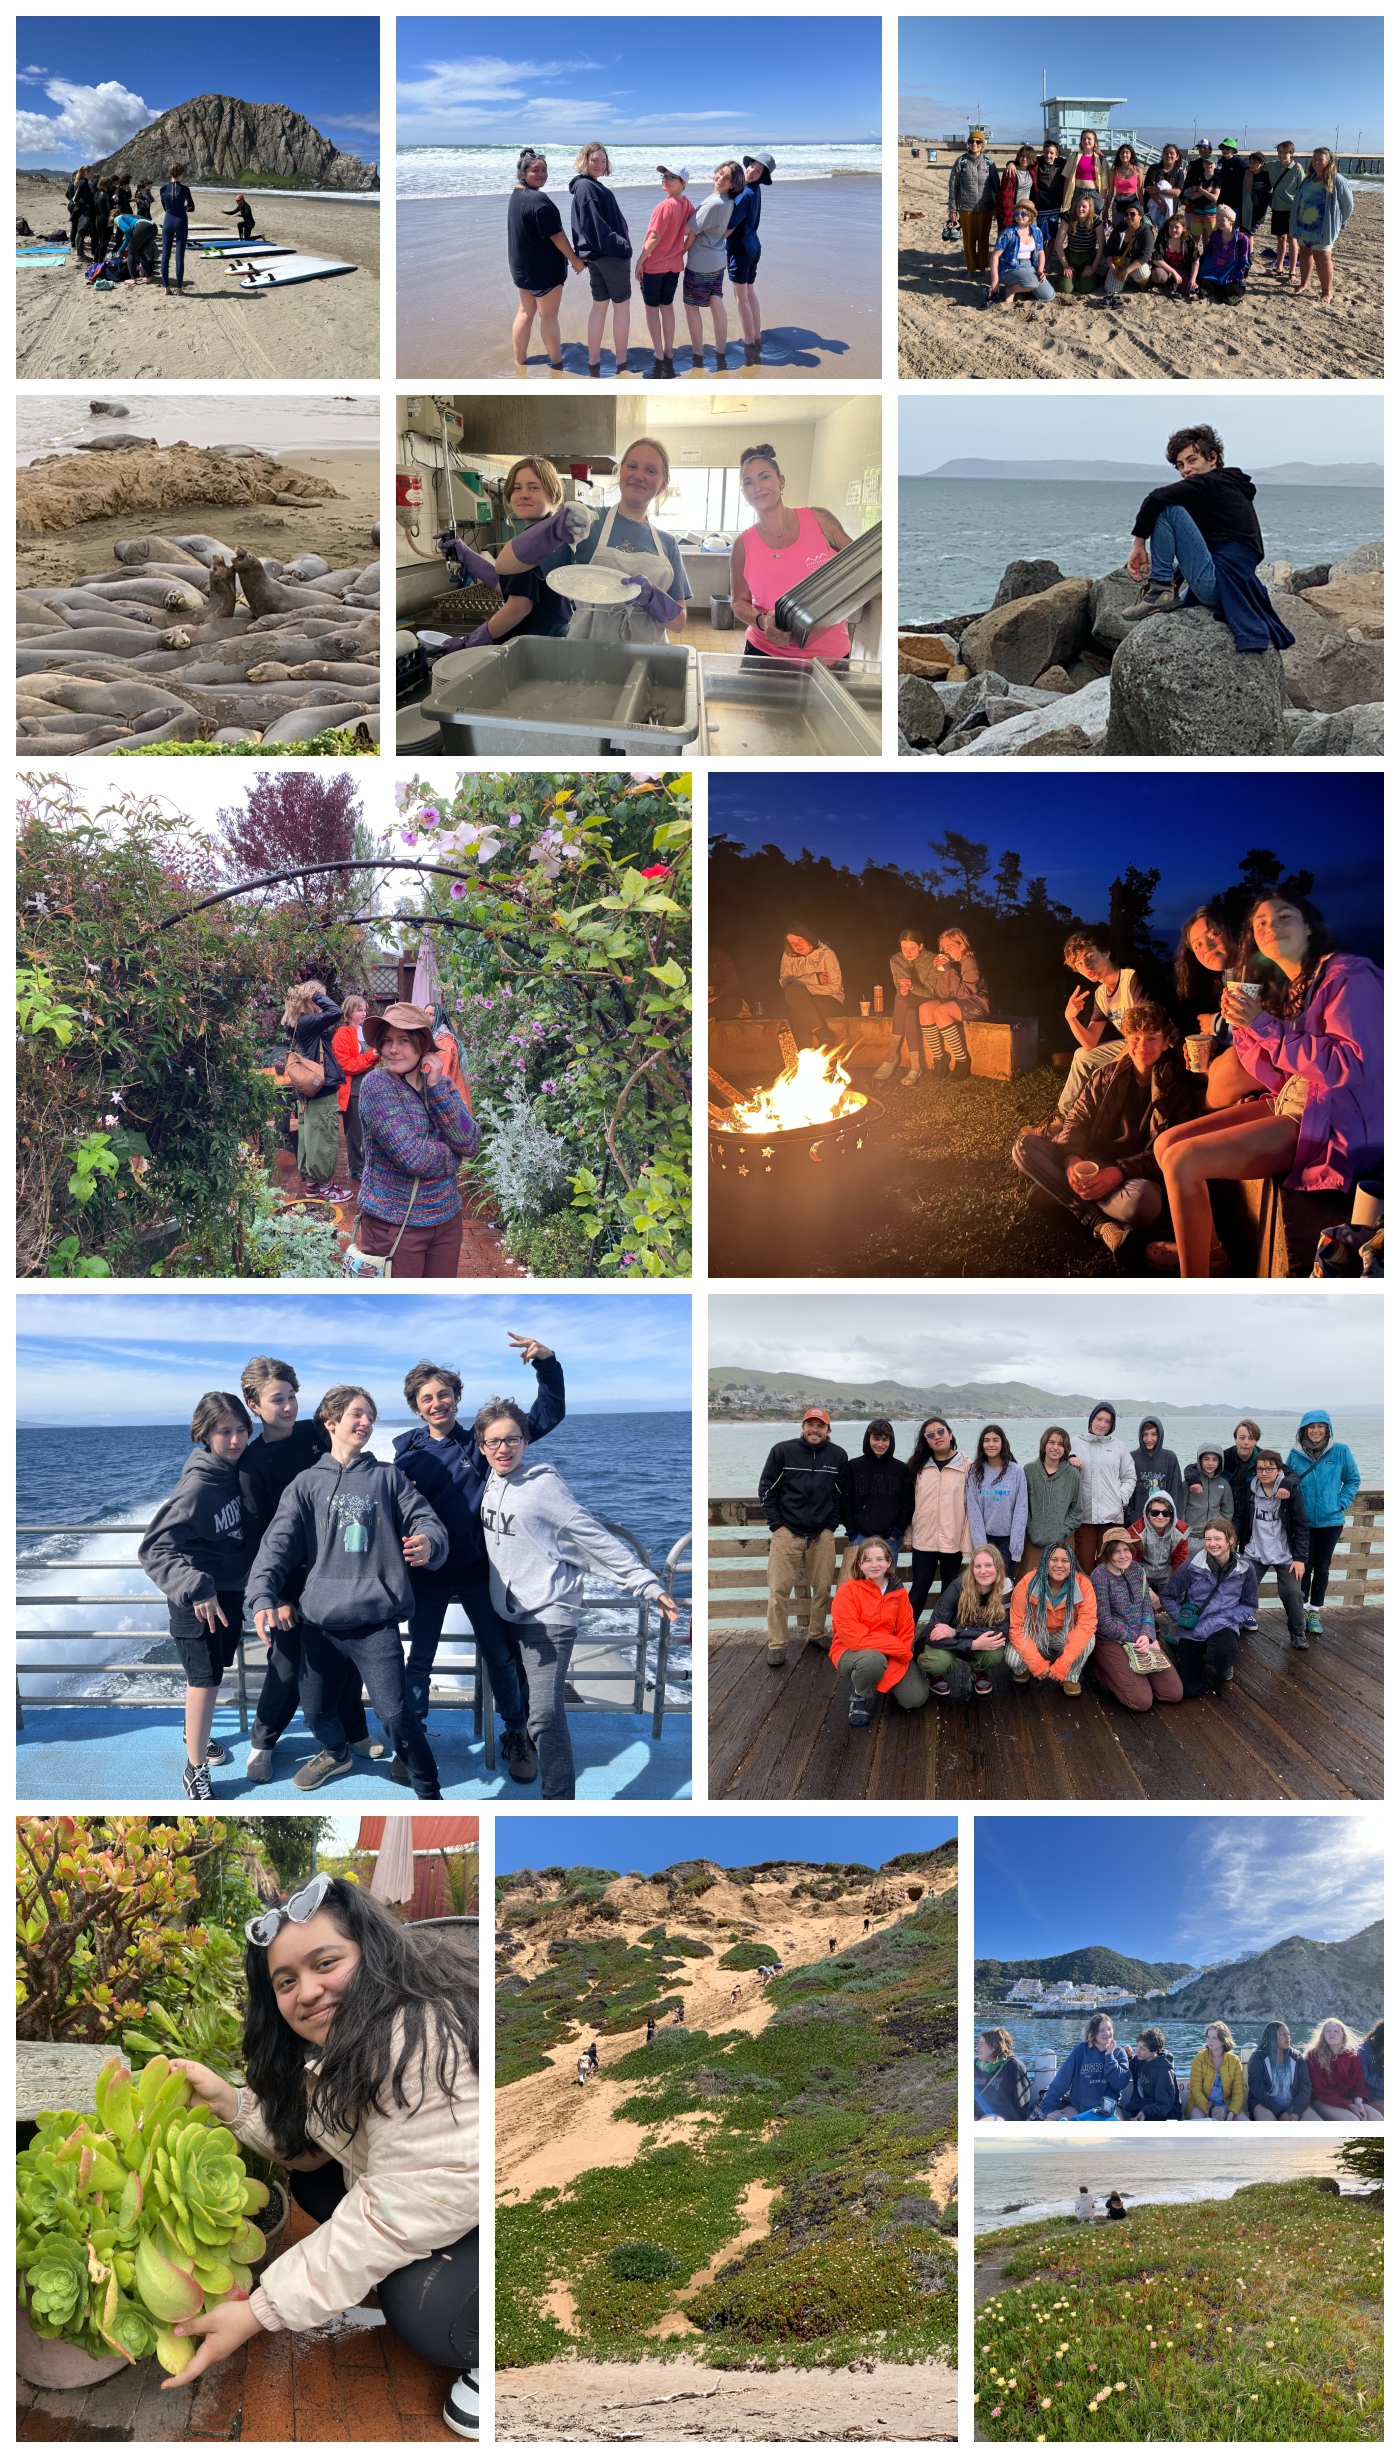 Photos of the students on their trip to CA; hiking, bonfiring, working, and learning.